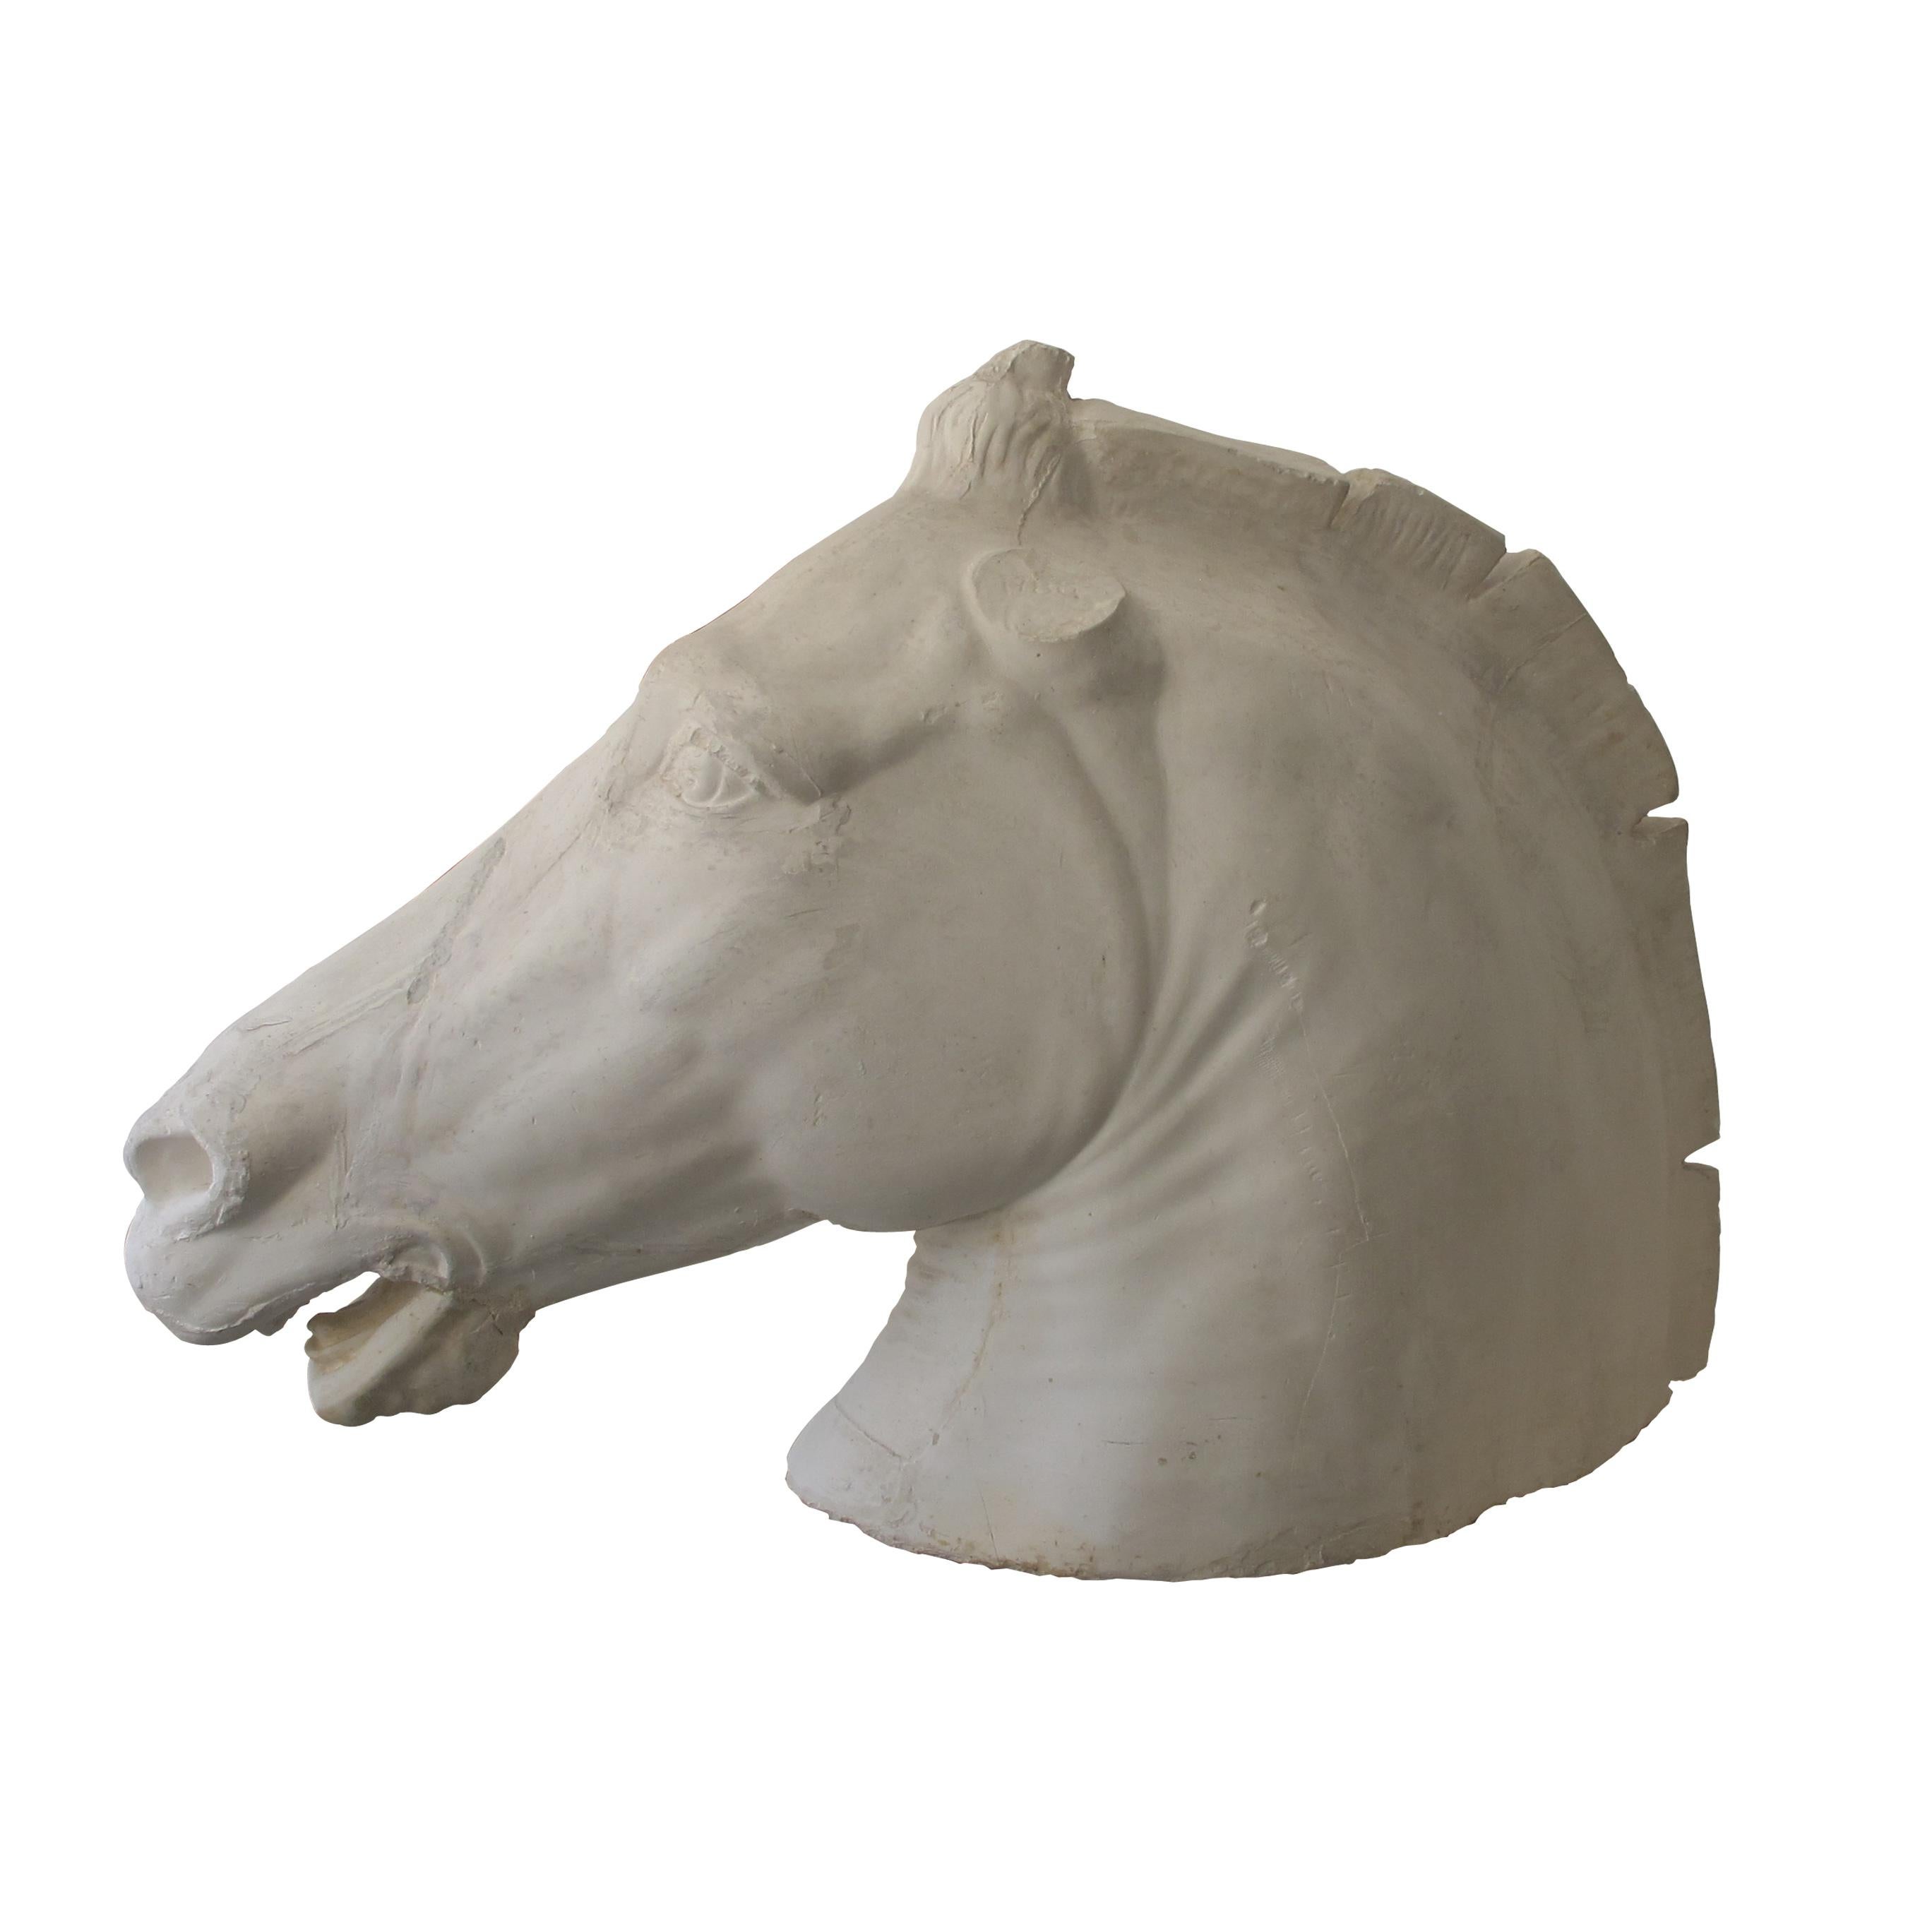 Arts and Crafts Early 20th Century French Life-Size Plaster Horse Head Inspired by The Parthenon